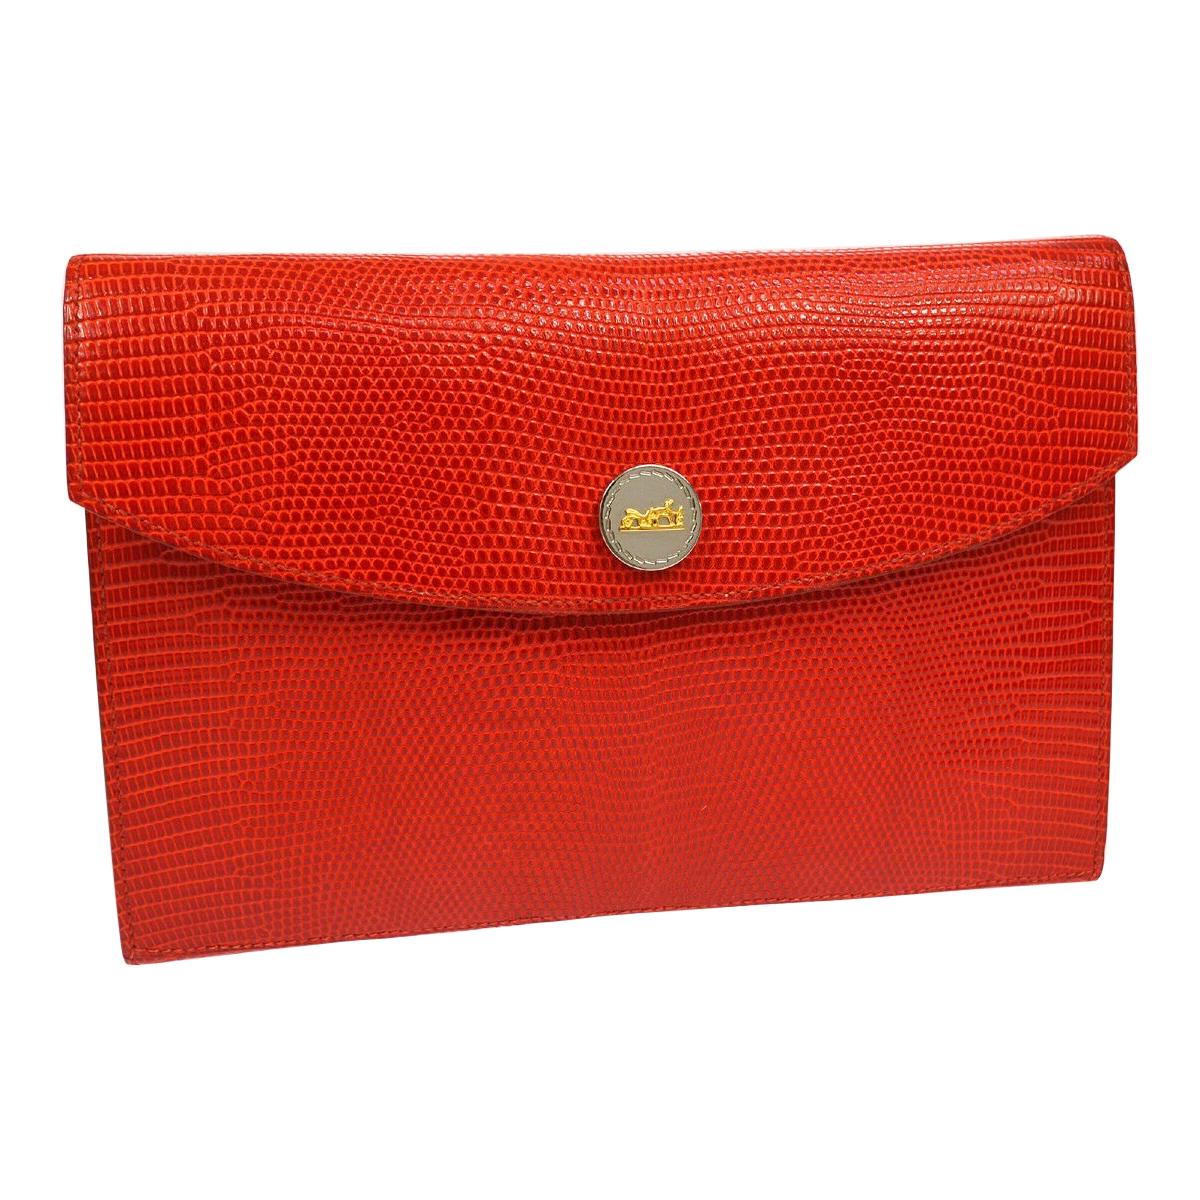 Hermes Red Lizard Exotic Leather Silver Evening Envelope Clutch Flap Bag